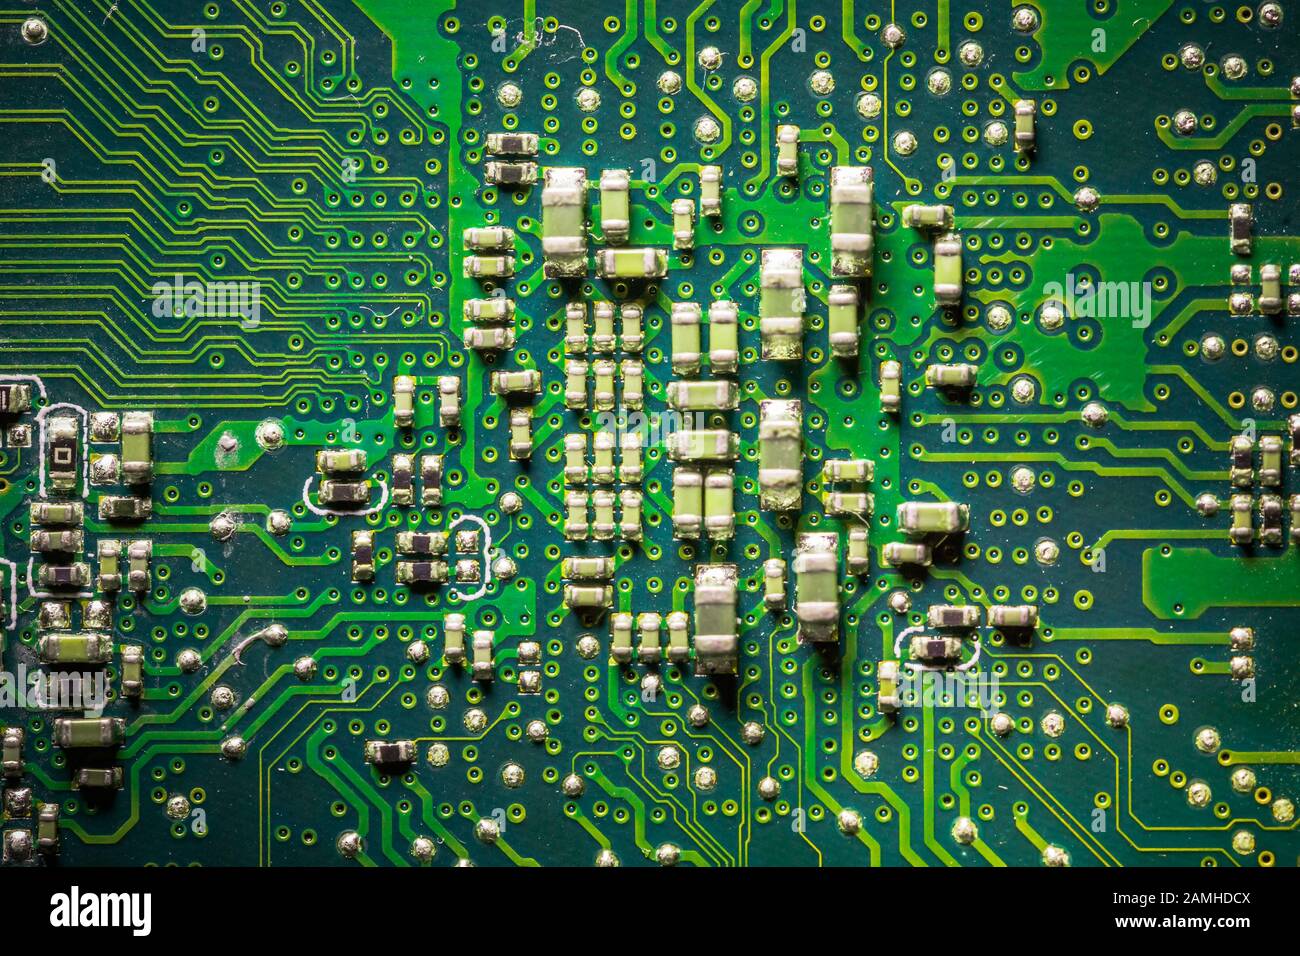 Close-up board with micro chips from an electrical appliance or computer. Concept of modern technology. Concept of electronics and microchips. SMD Stock Photo